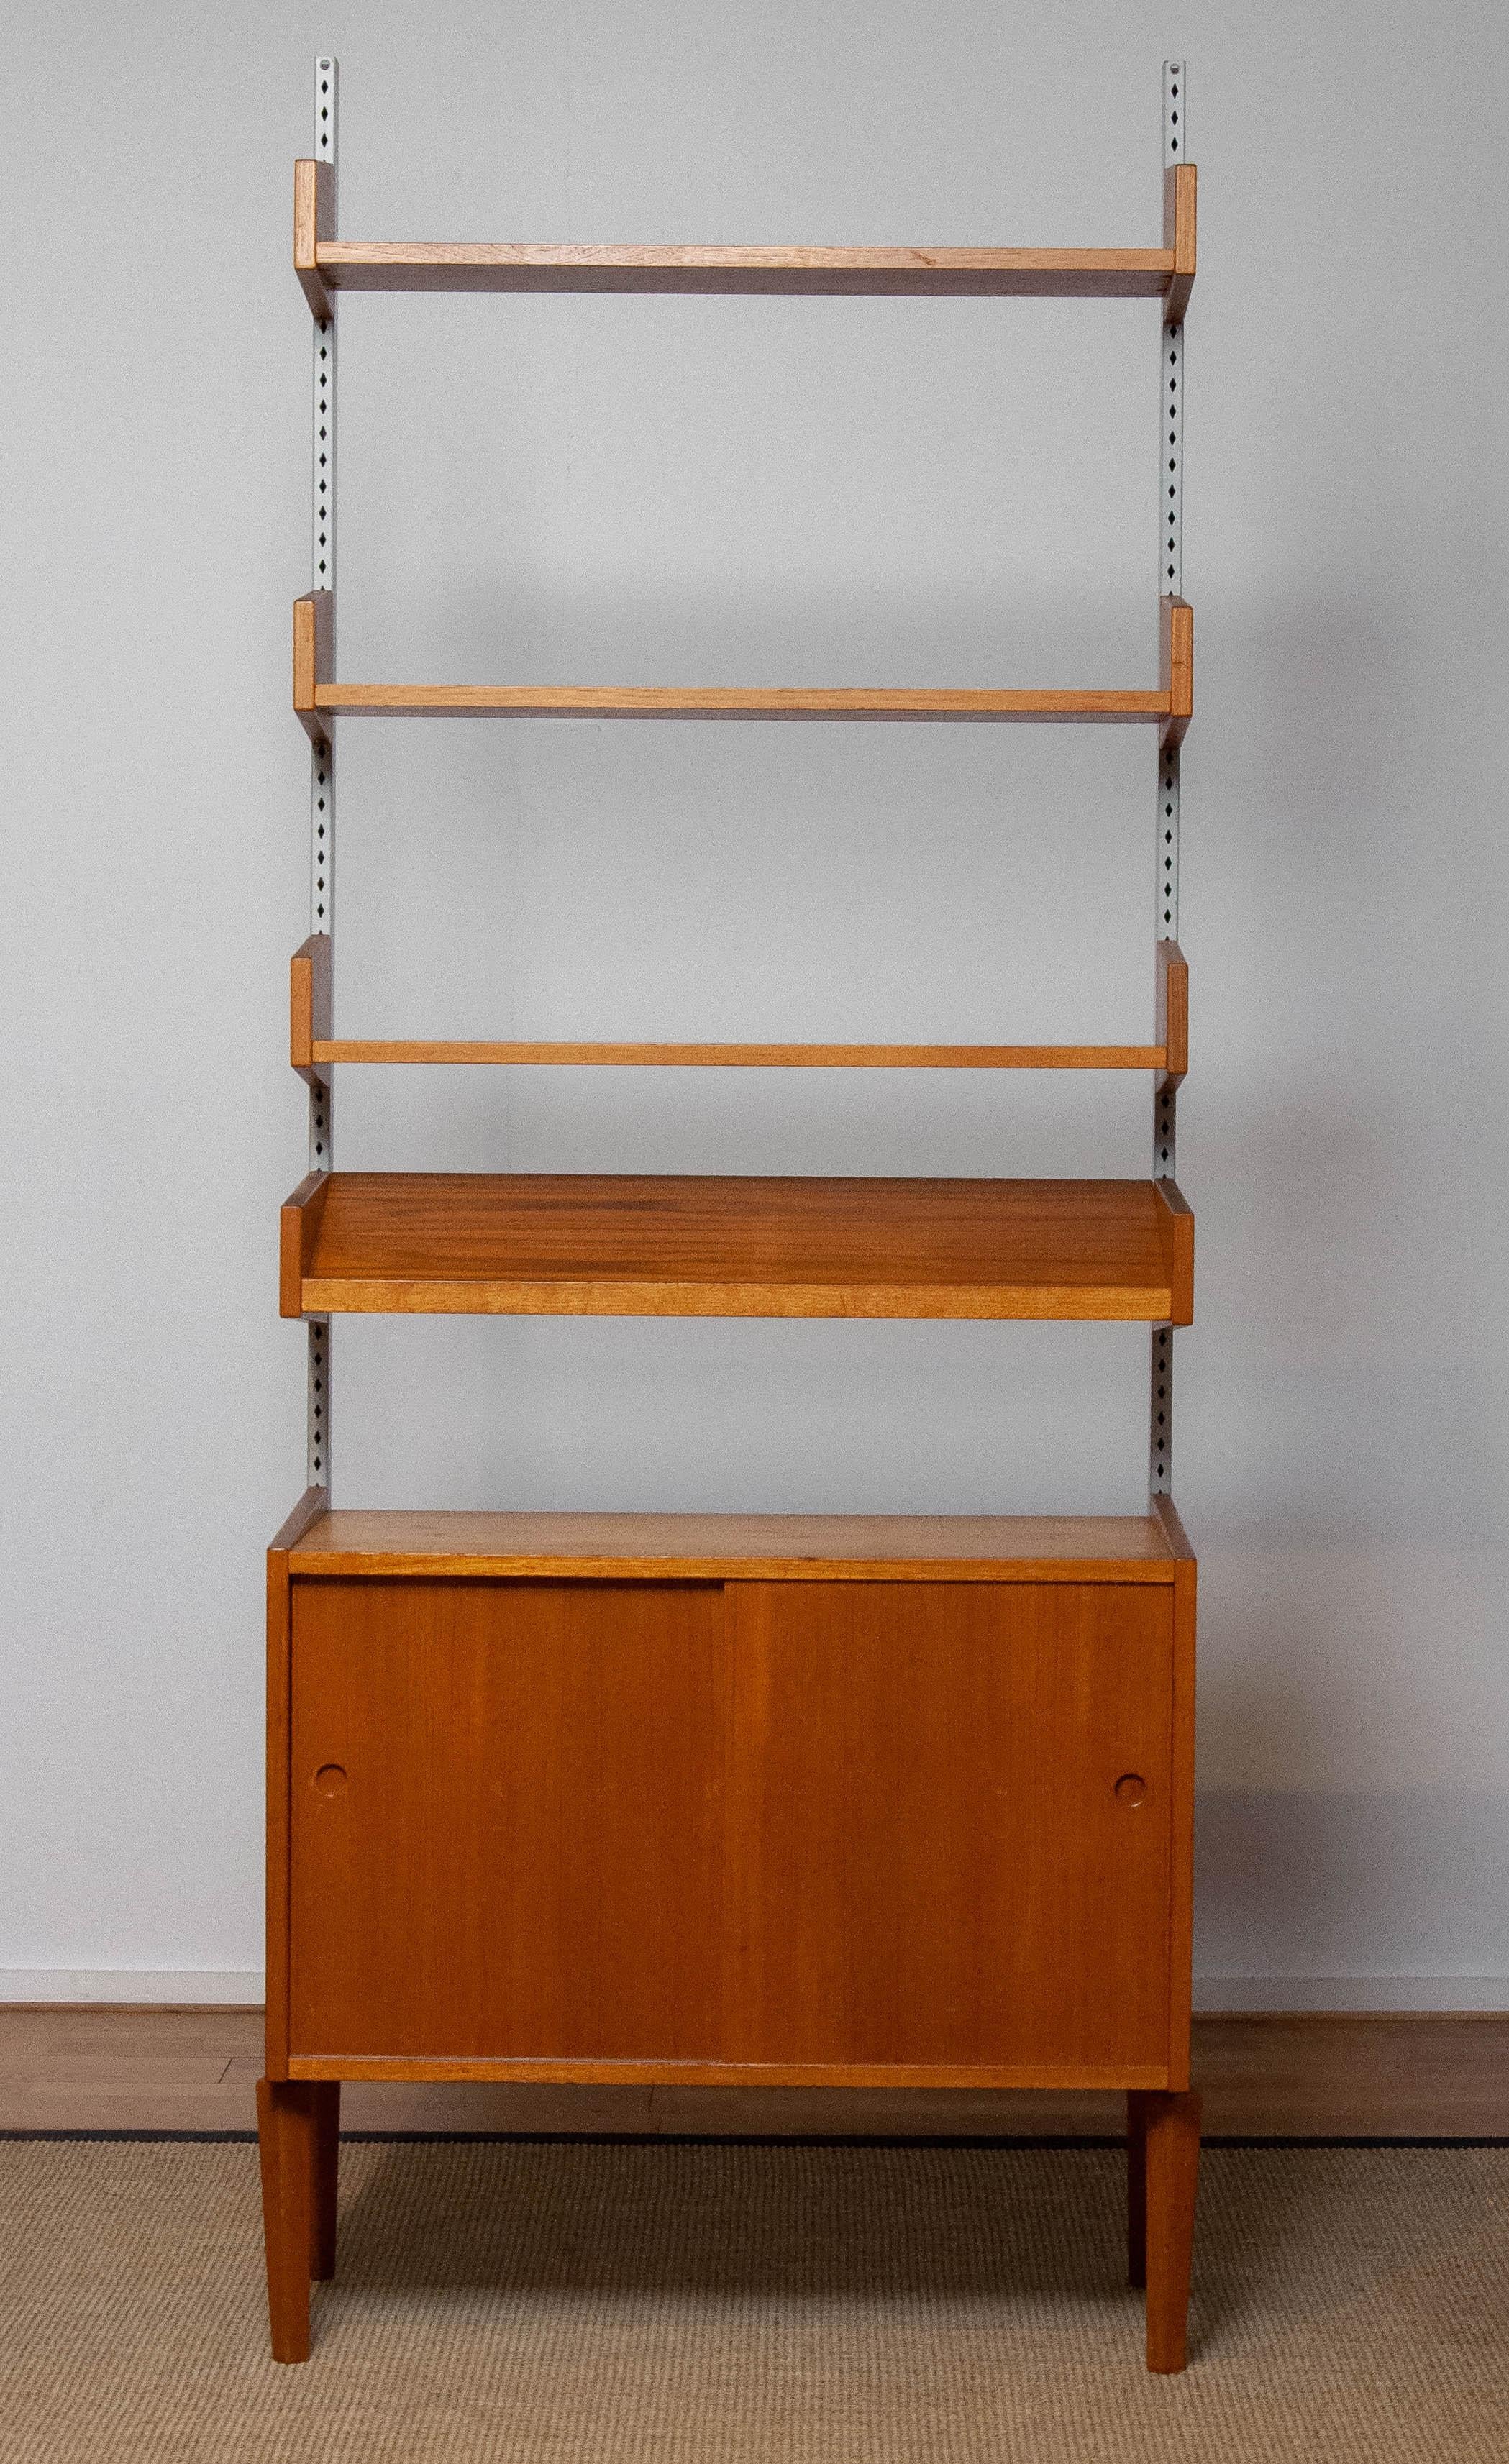 Teak Shelf System / Bookcase In Teak With Steel Bars By Harald Lundqvist 1950's 2